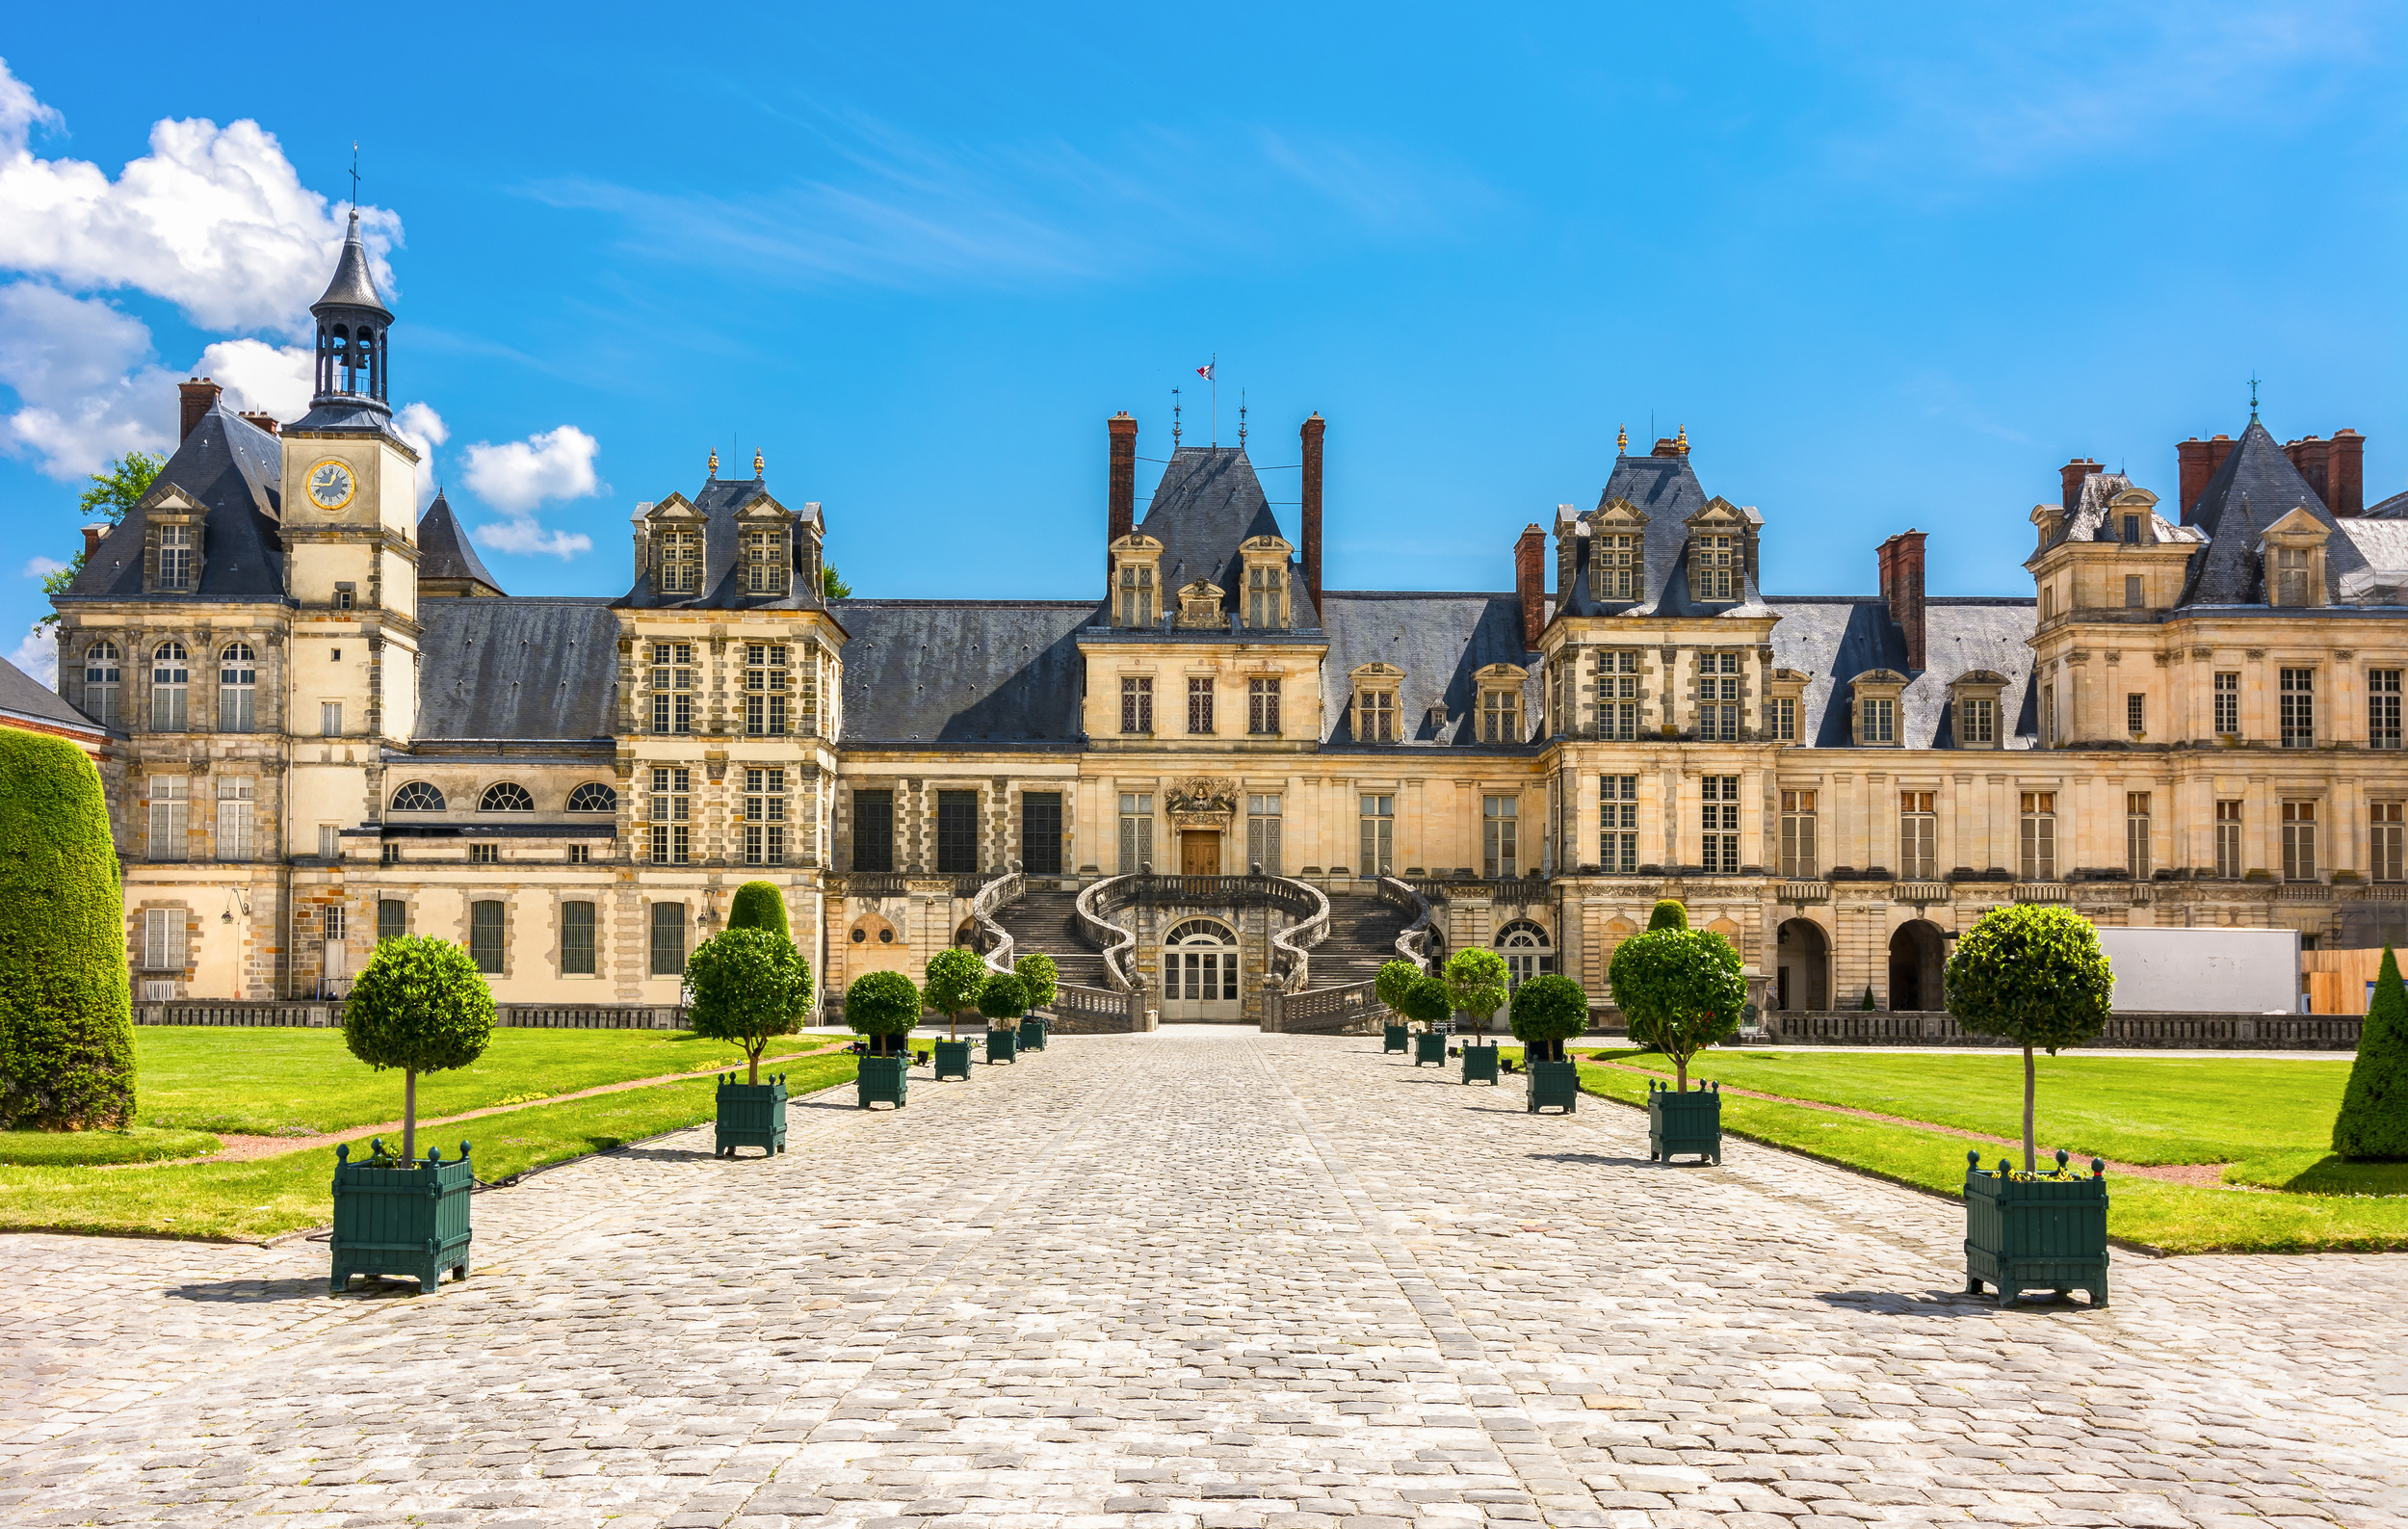 <p>This palace is located about an hour by train from Paris. It is the only chateau that can claim to be a continuous residence of French Royalty from the 12th to the 19th centuries. It is also much more impressive inside than Versailles as it wasn’t ransacked during the revolution.</p><p>You may also like: <a href='https://www.yardbarker.com/lifestyle/articles/21_food_drink_items_that_have_been_around_for_thousands_of_years_012324/s1__38178665'>21 food & drink items that have been around for thousands of years</a></p>